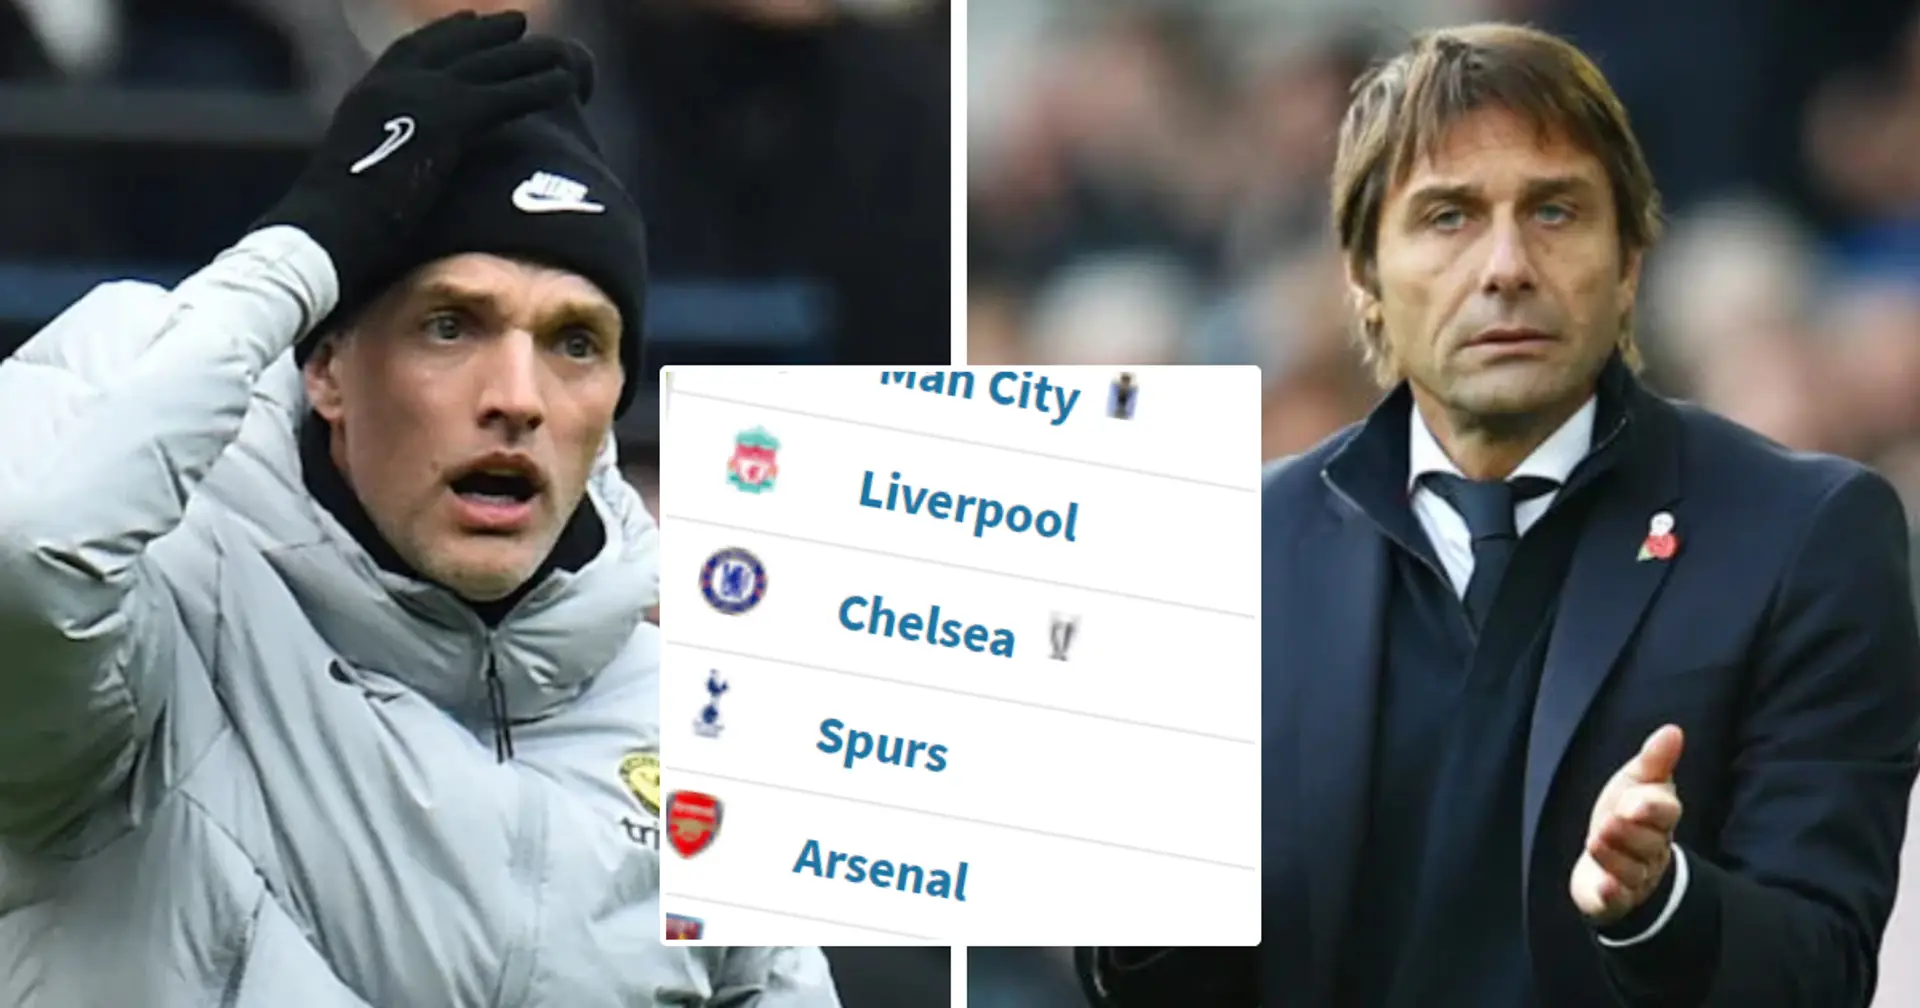 Spurs have 5 games in hand: League table since Conte's arrival shows why Blues should be worried